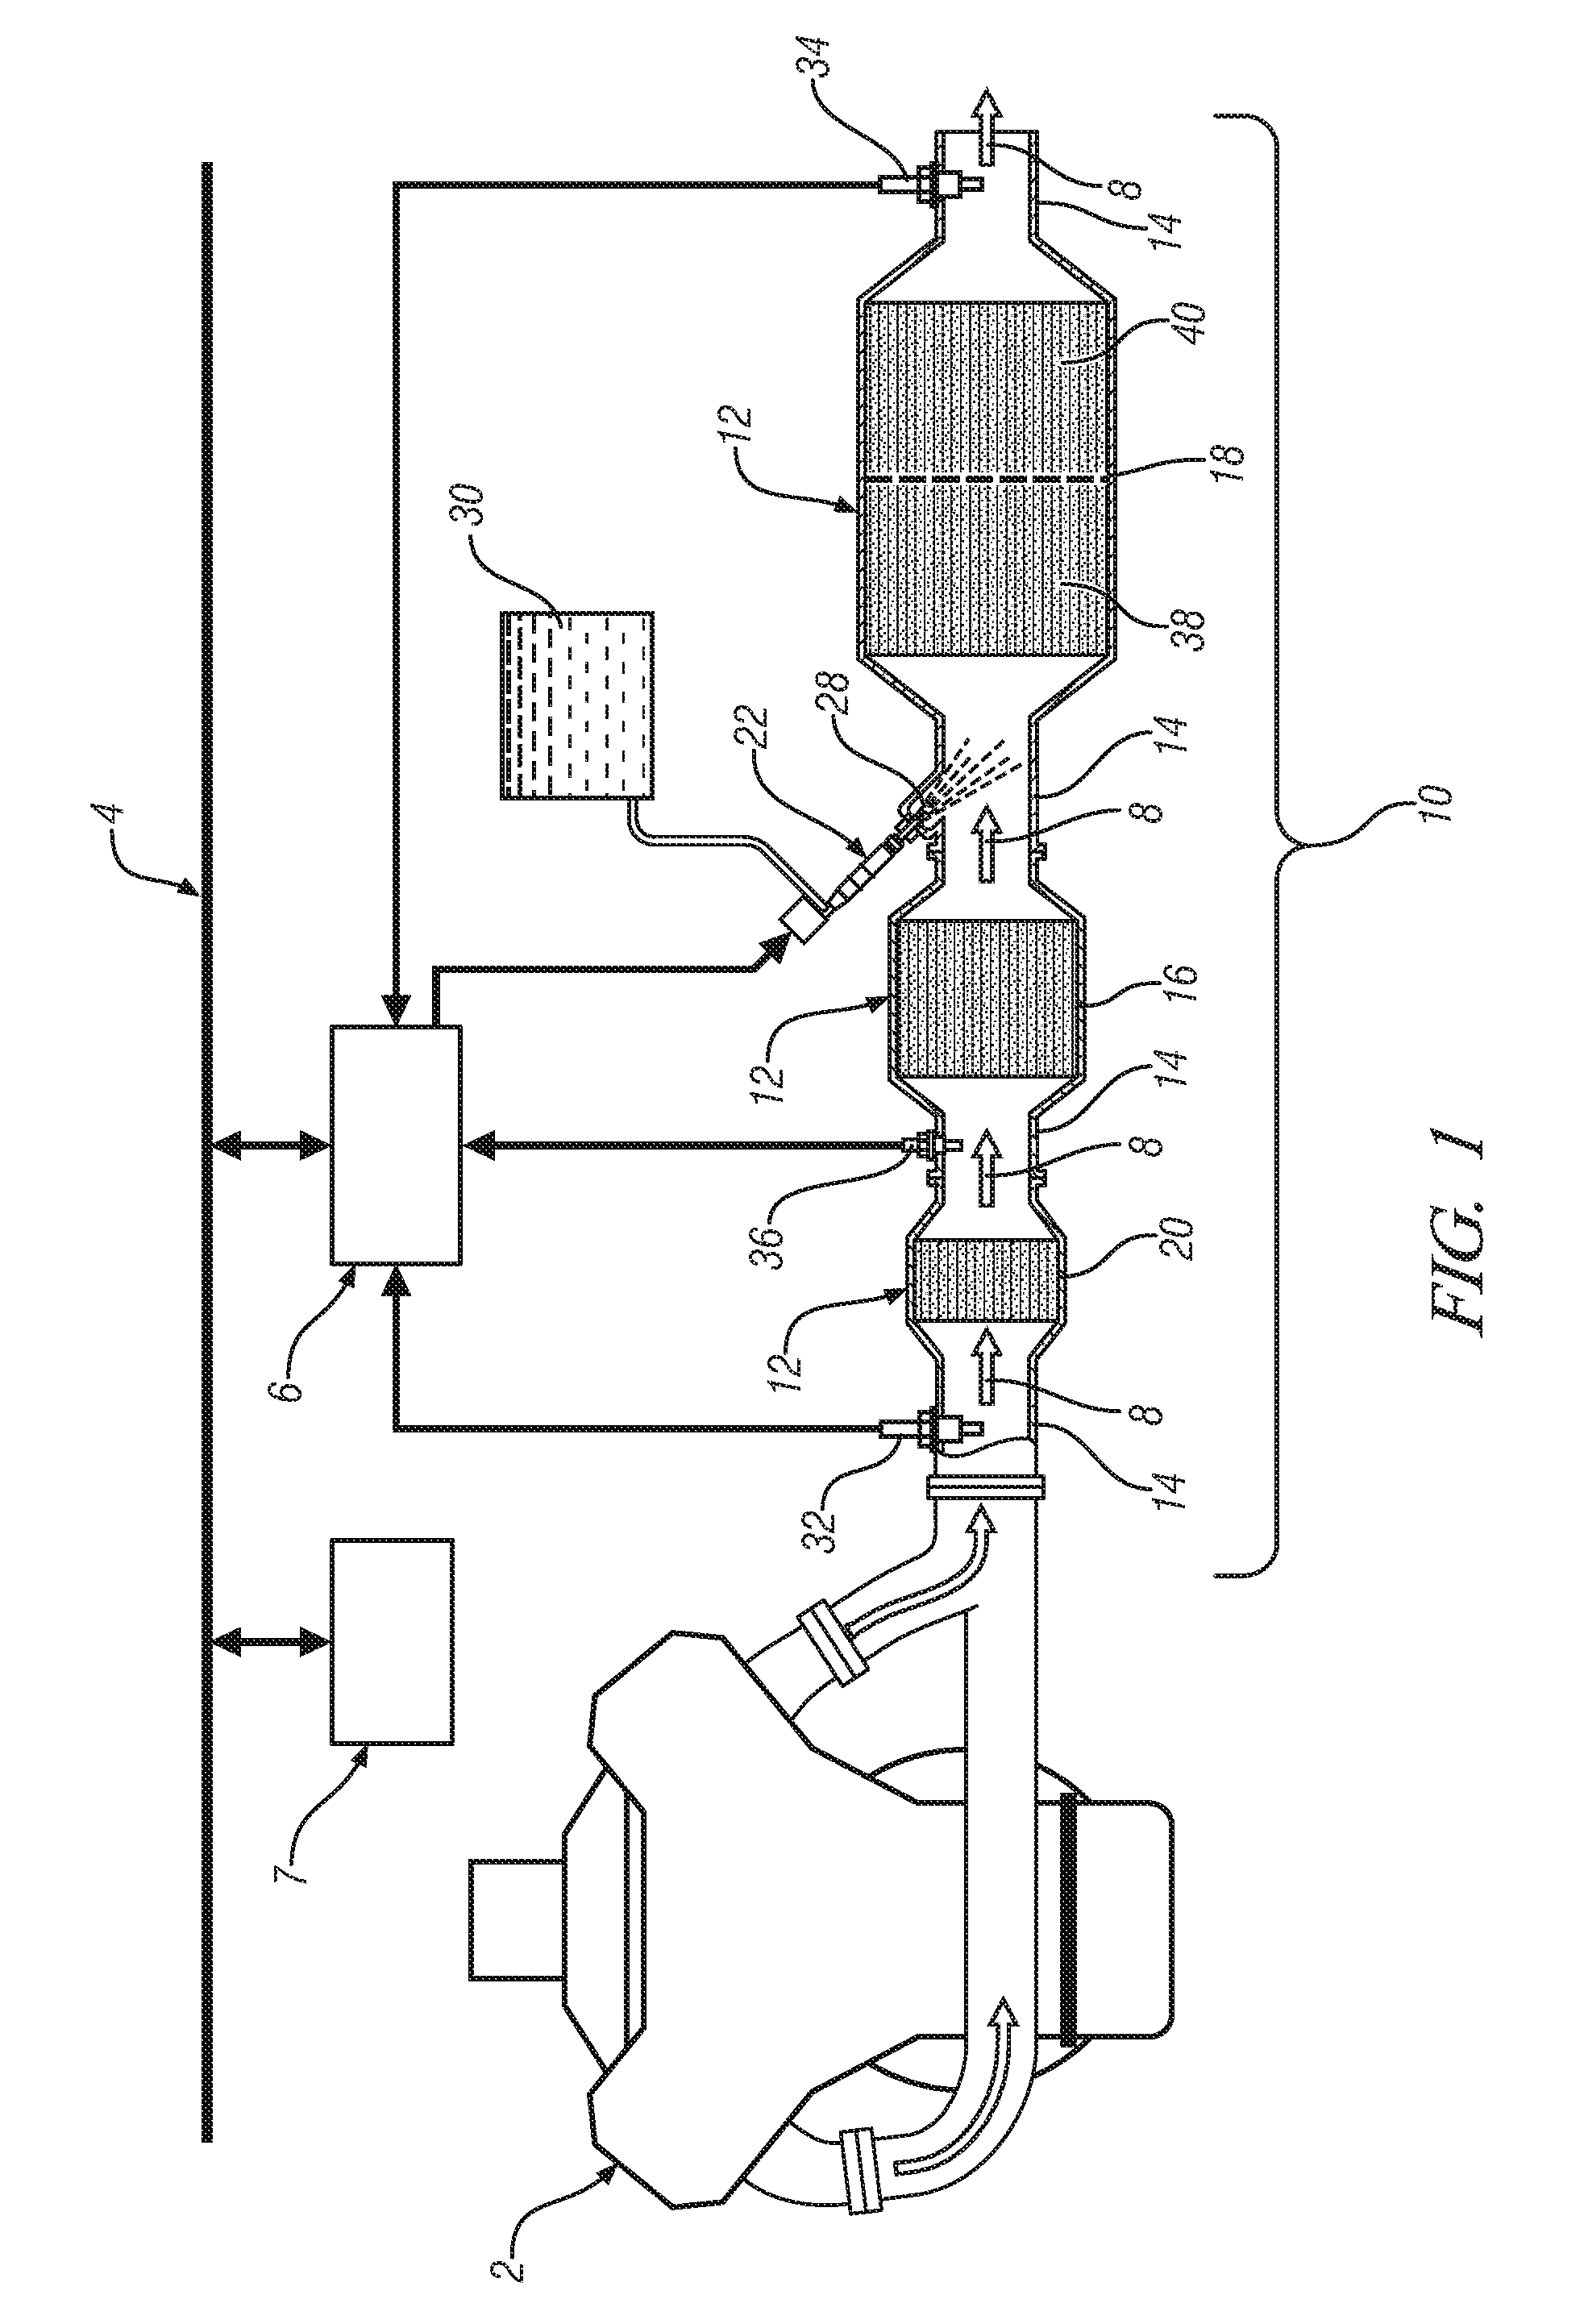 Exhaust gas treatment system including a lean NOX trap and two-way catalyst and method of using the same